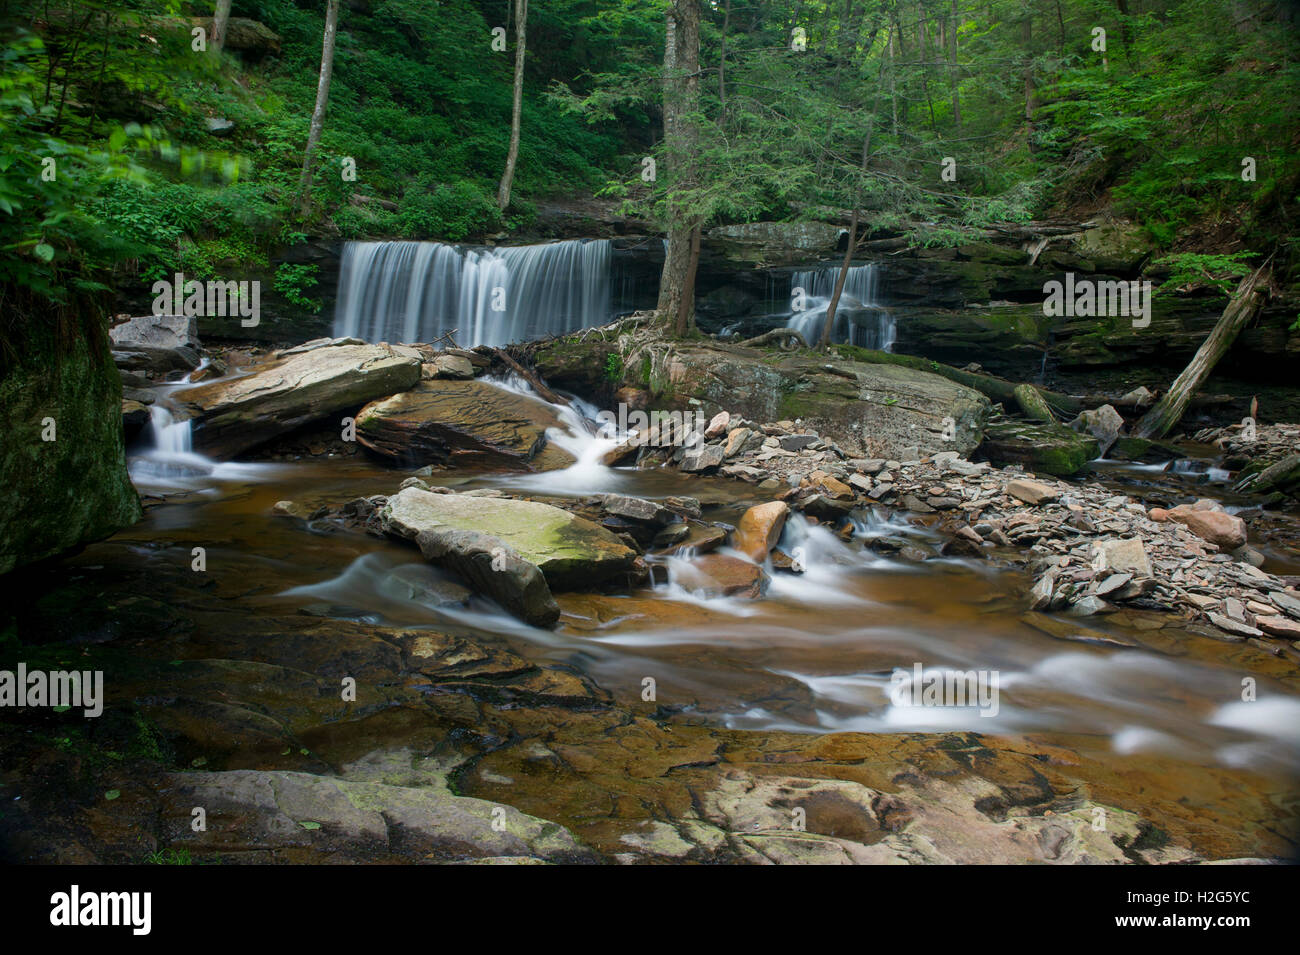 A long exposure of a scenic waterfall landscape in a bright green spring forest. Stock Photo